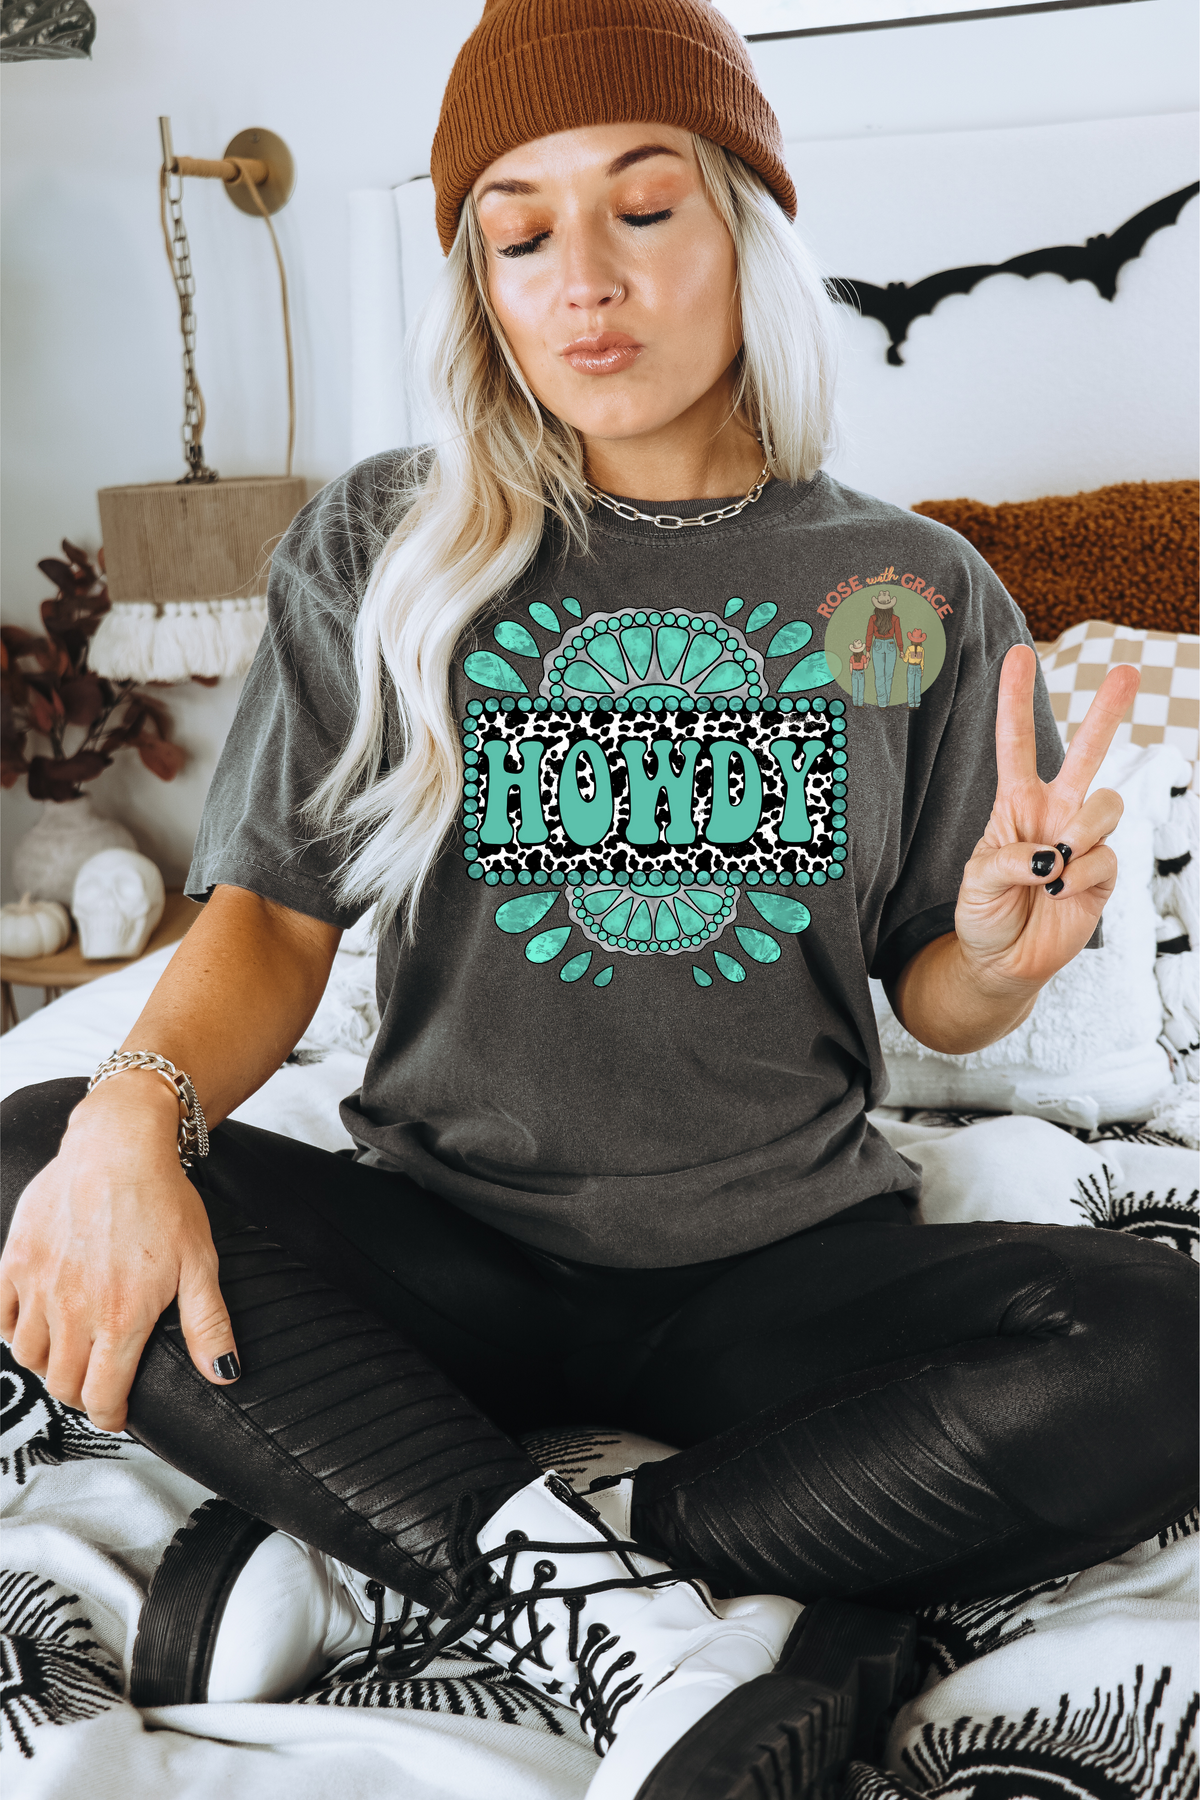 Howdy Cow Print Turquoise - Shirt or Sweatshirt *YOU PICK COLOR*